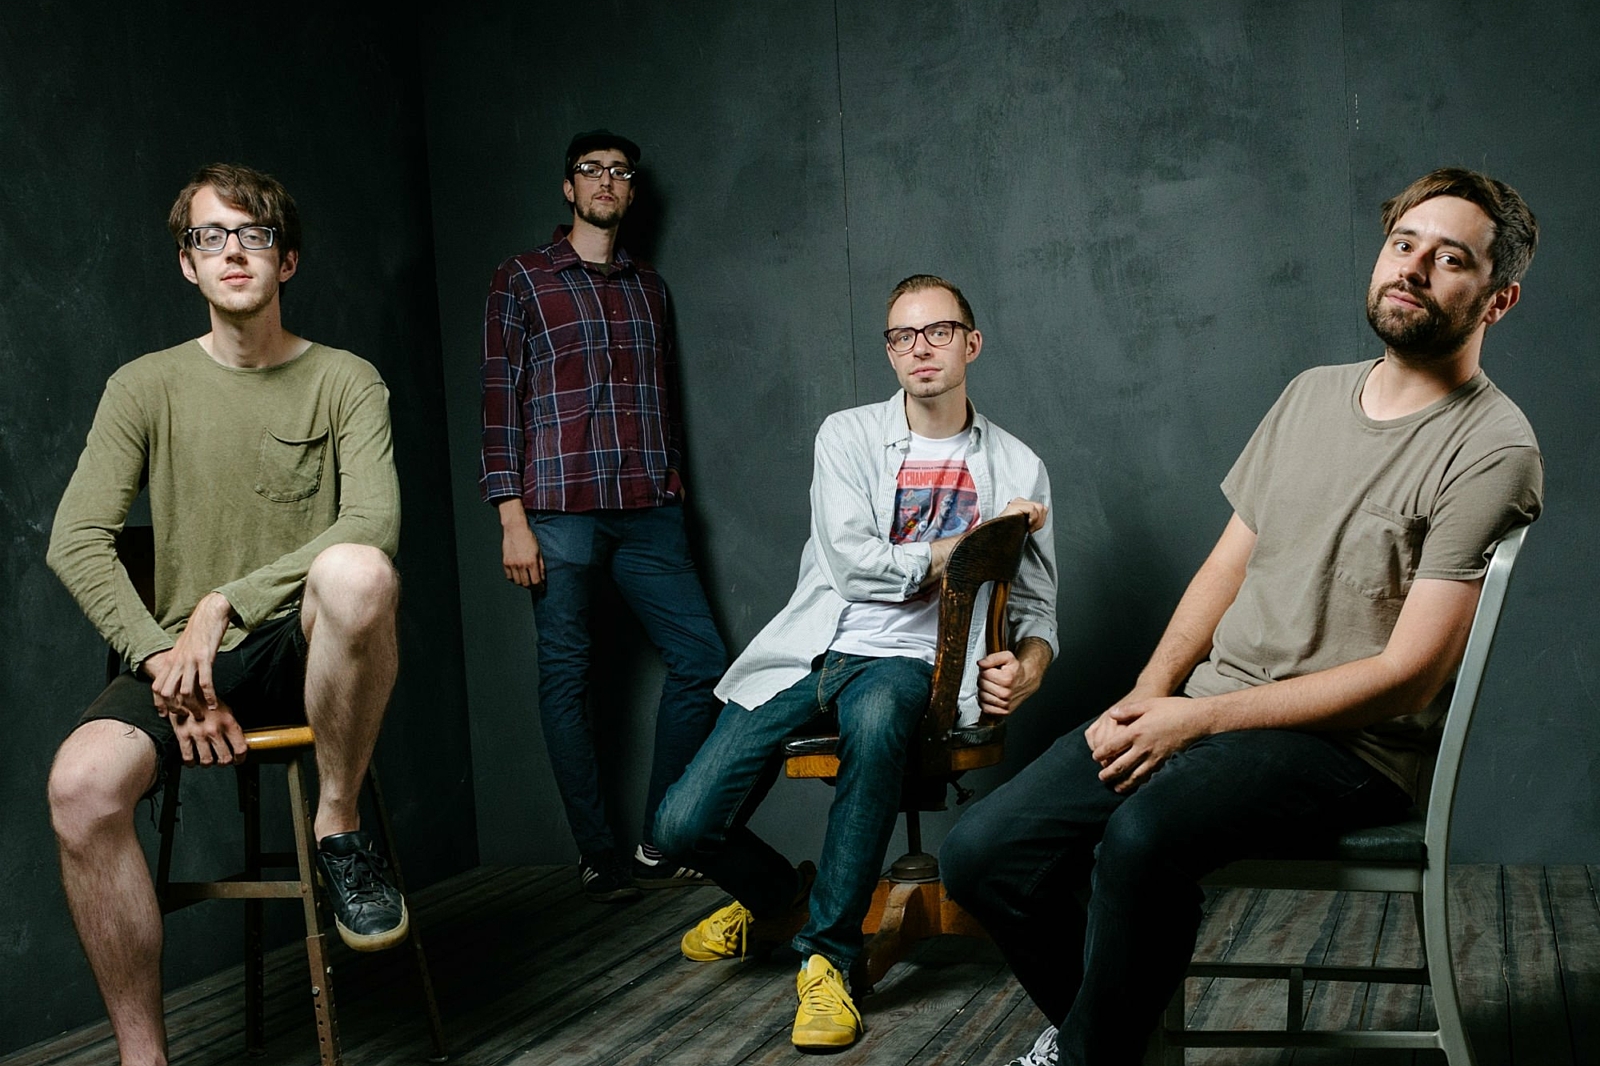 Cloud Nothings announce UK/EU dates with The Hotelier